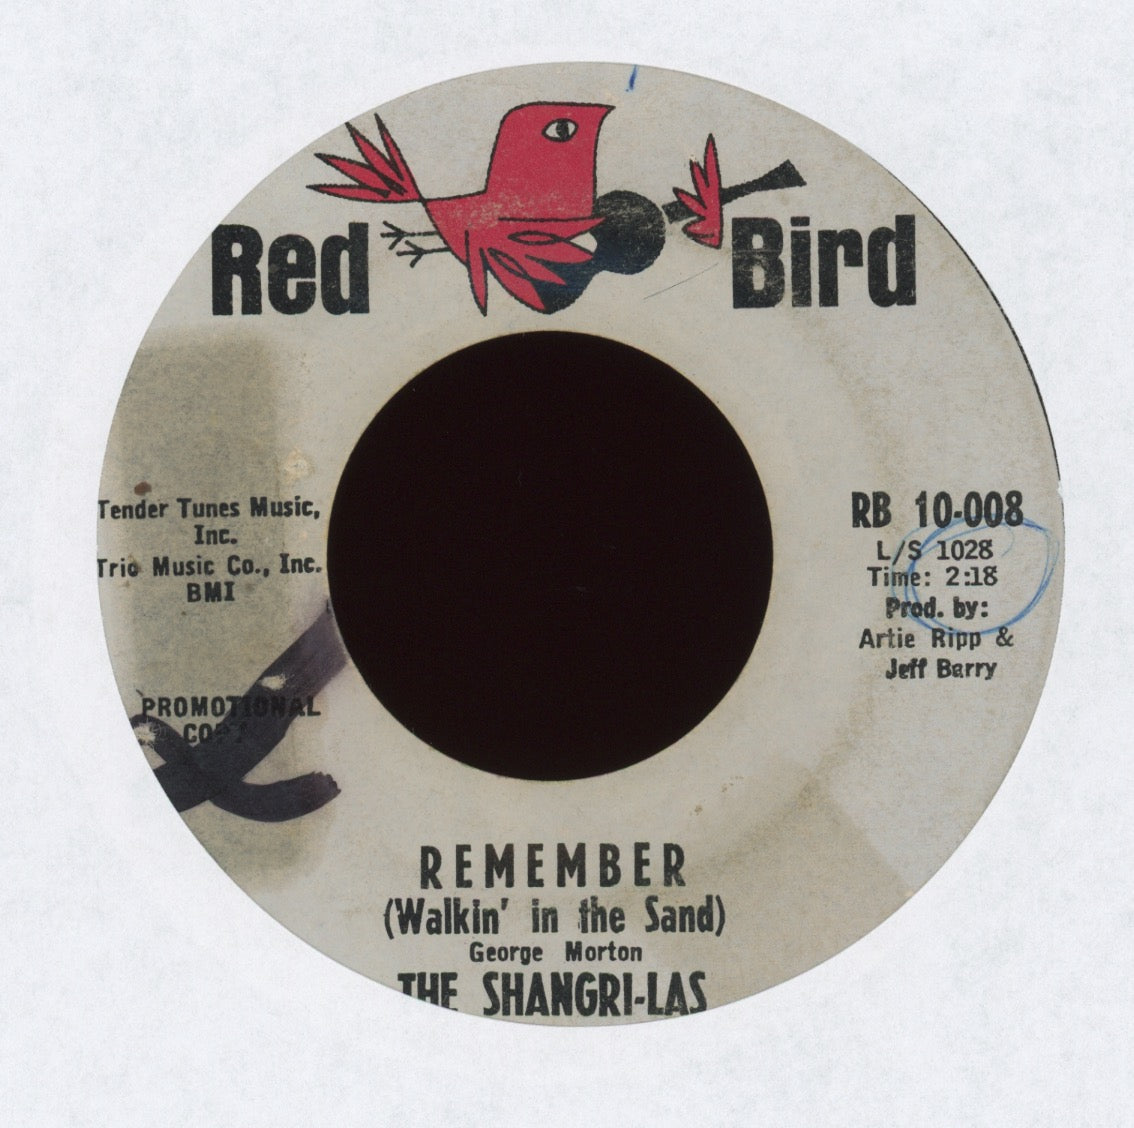 The Shangri-Las - Remember (Walking In The Sand) on Red Bird Promo